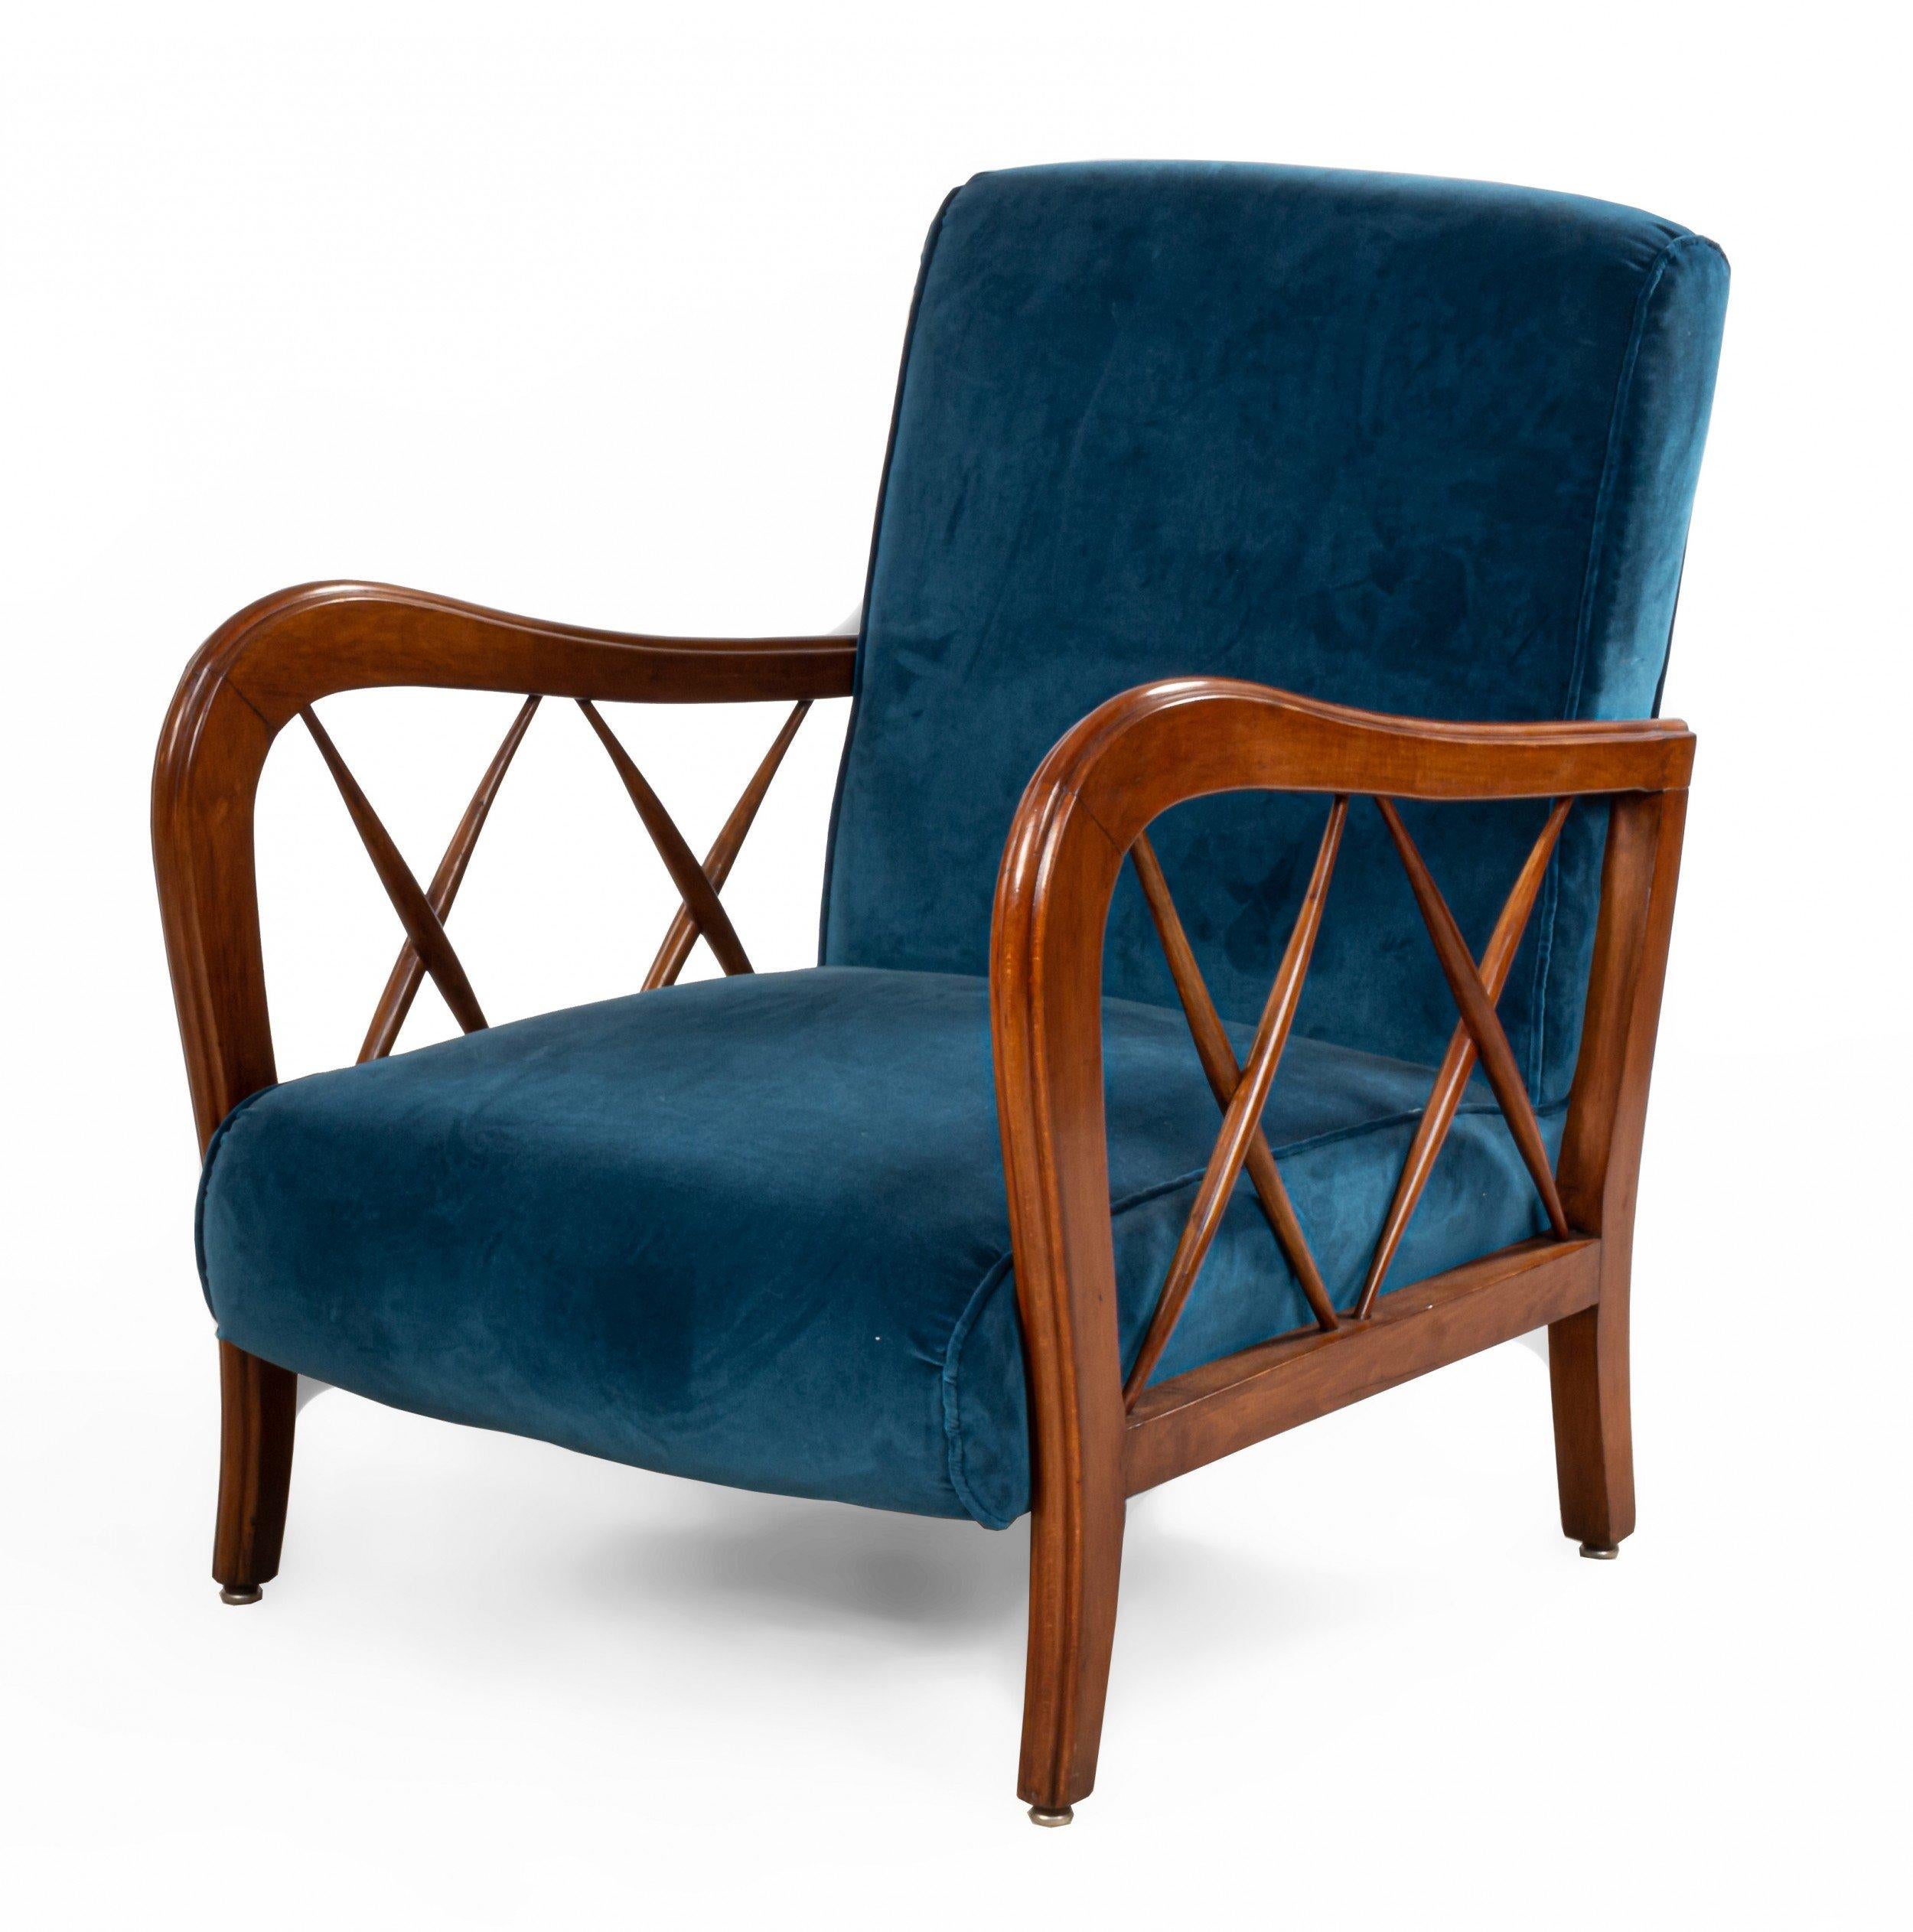 Pair of Italian Midcentury Paolo Buffa style lounge armchairs with a walnut frames with x-detailing and teal blue velvet upholstery.